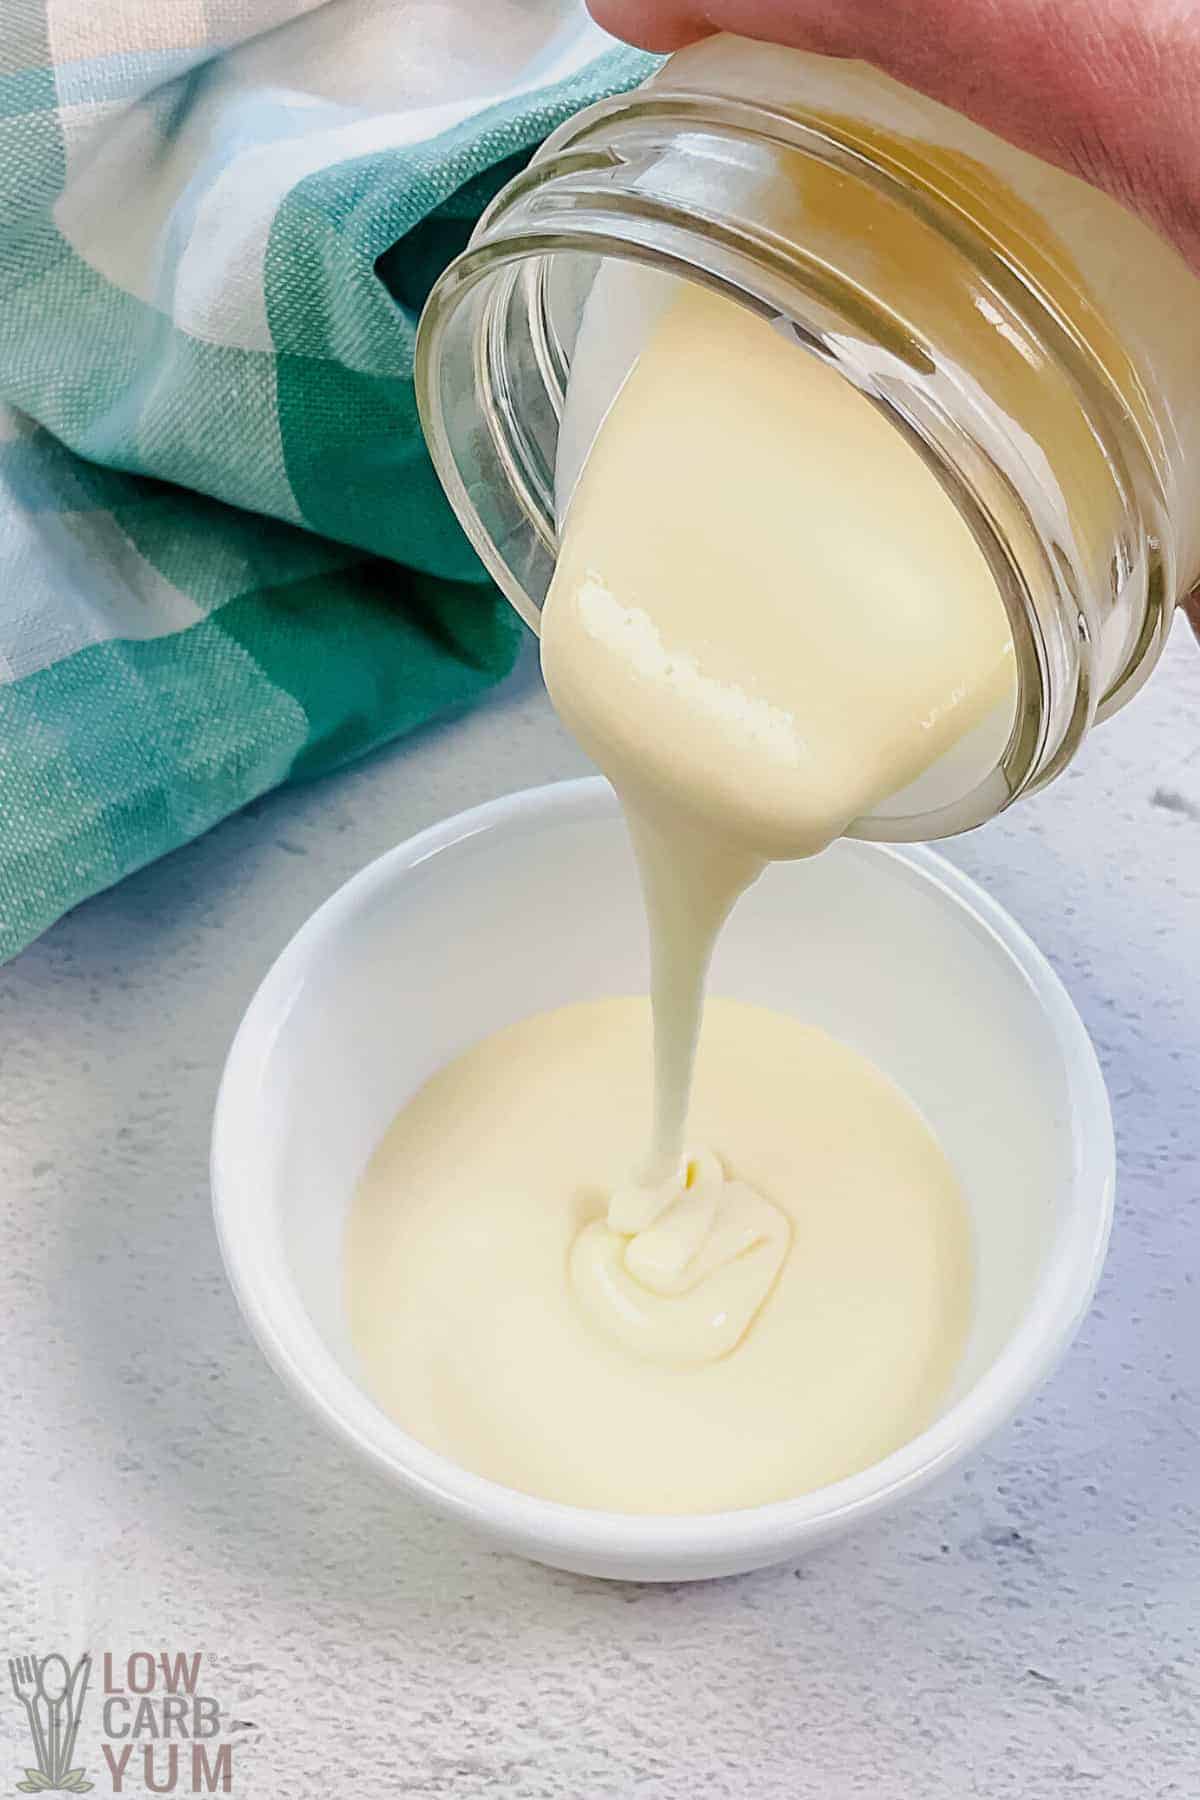 pouring sweetened condensed milk into small white bowl from jar.